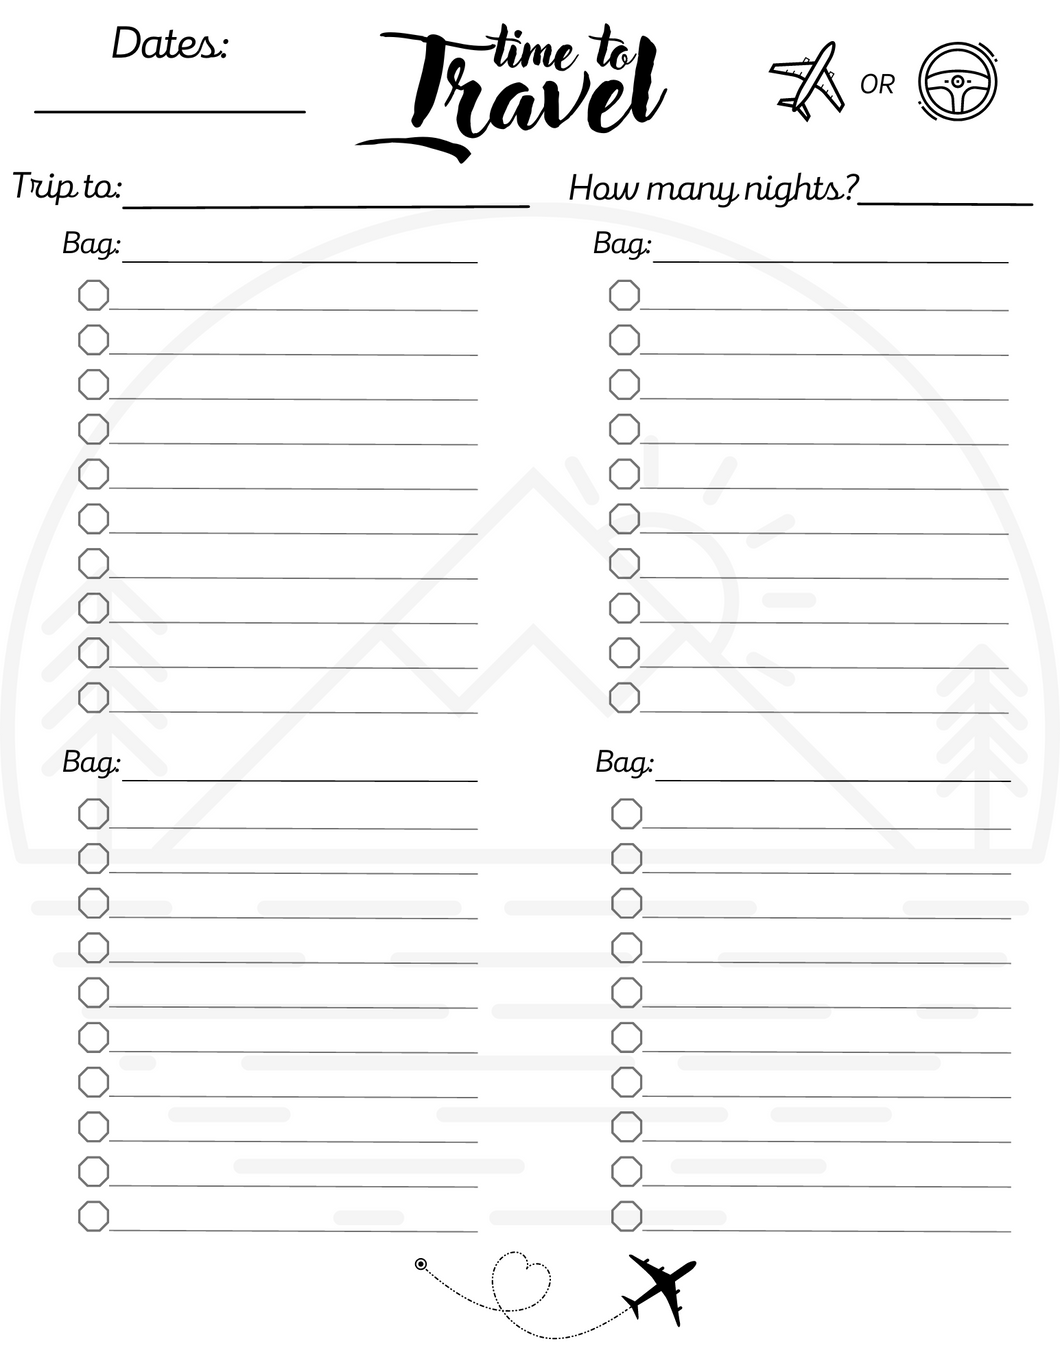 Printable Packing/Travel list with Mountains & 4 bag lists - Digital download